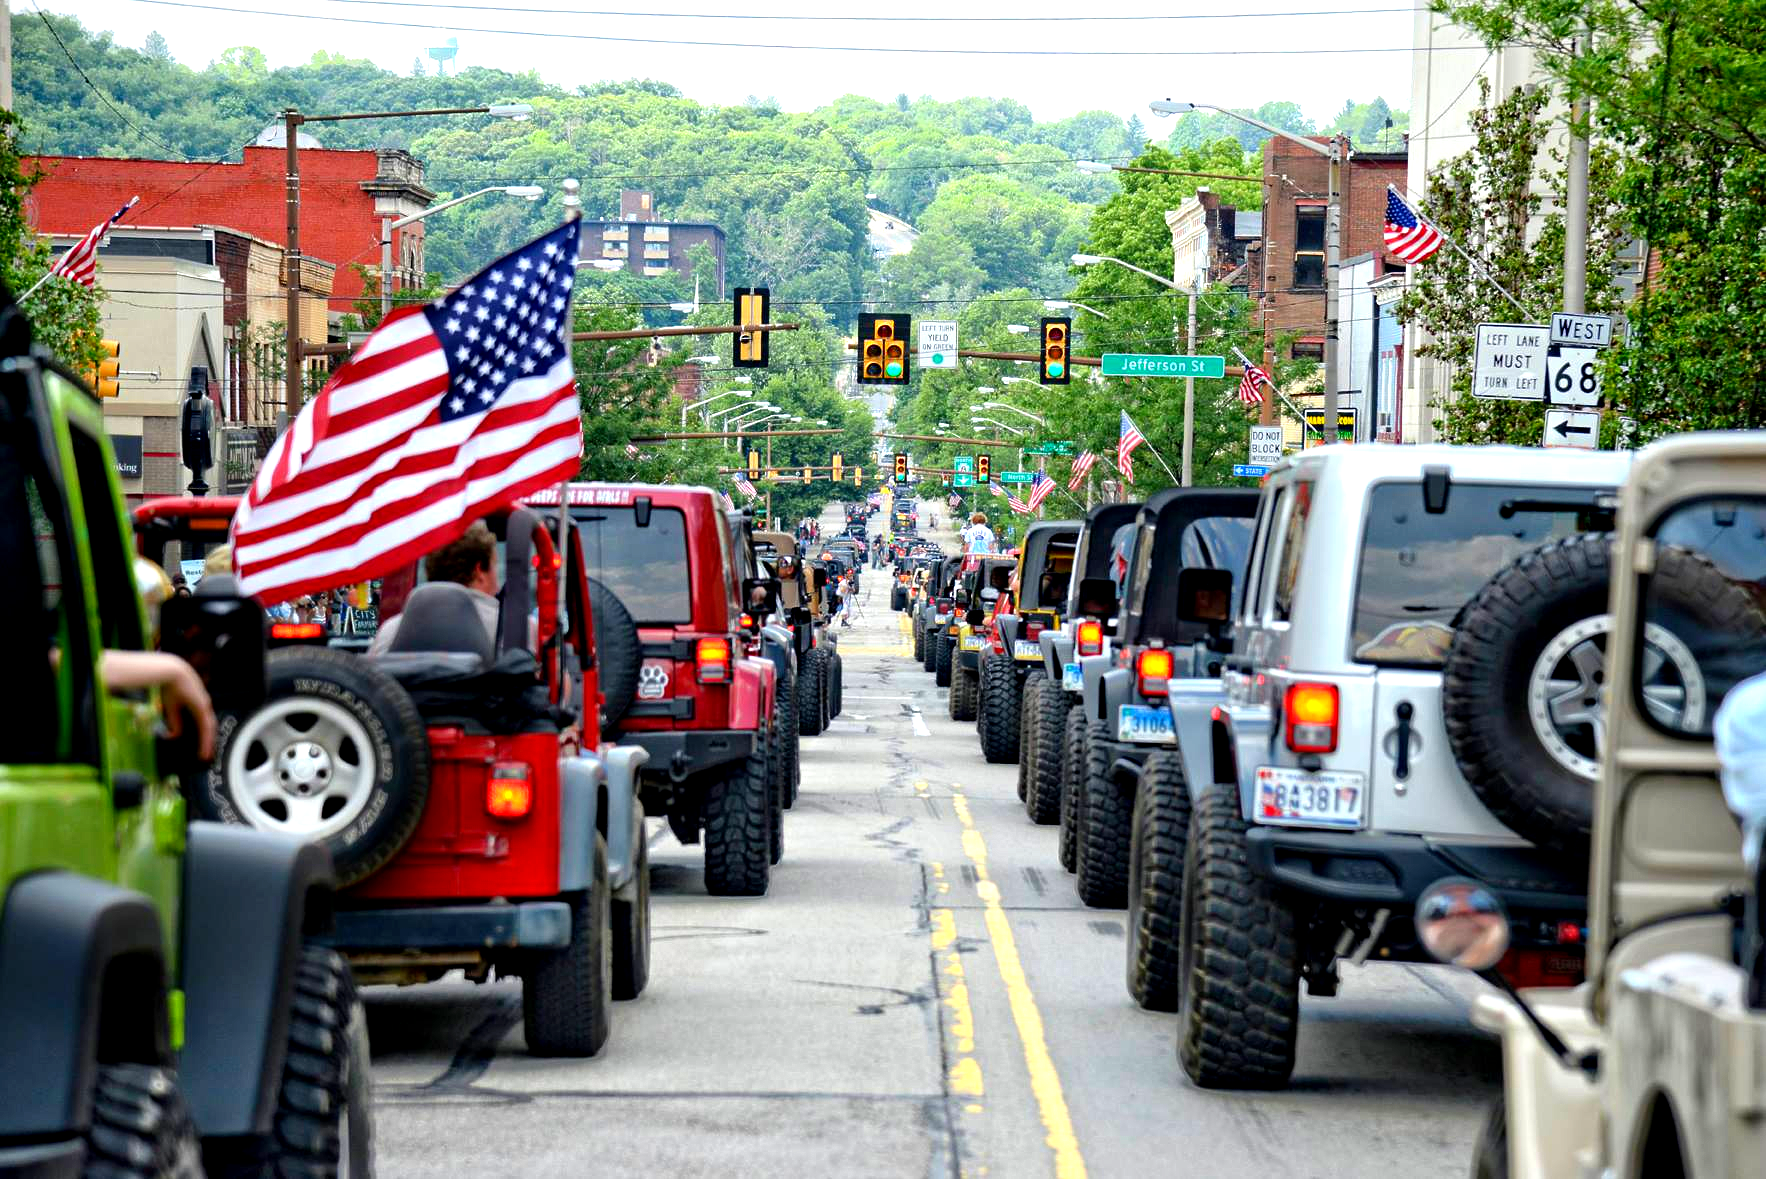 Largest parade of Jeeps: Bantam Jeep Heritage Festival breaks Guinness World Records record (VIDEO)